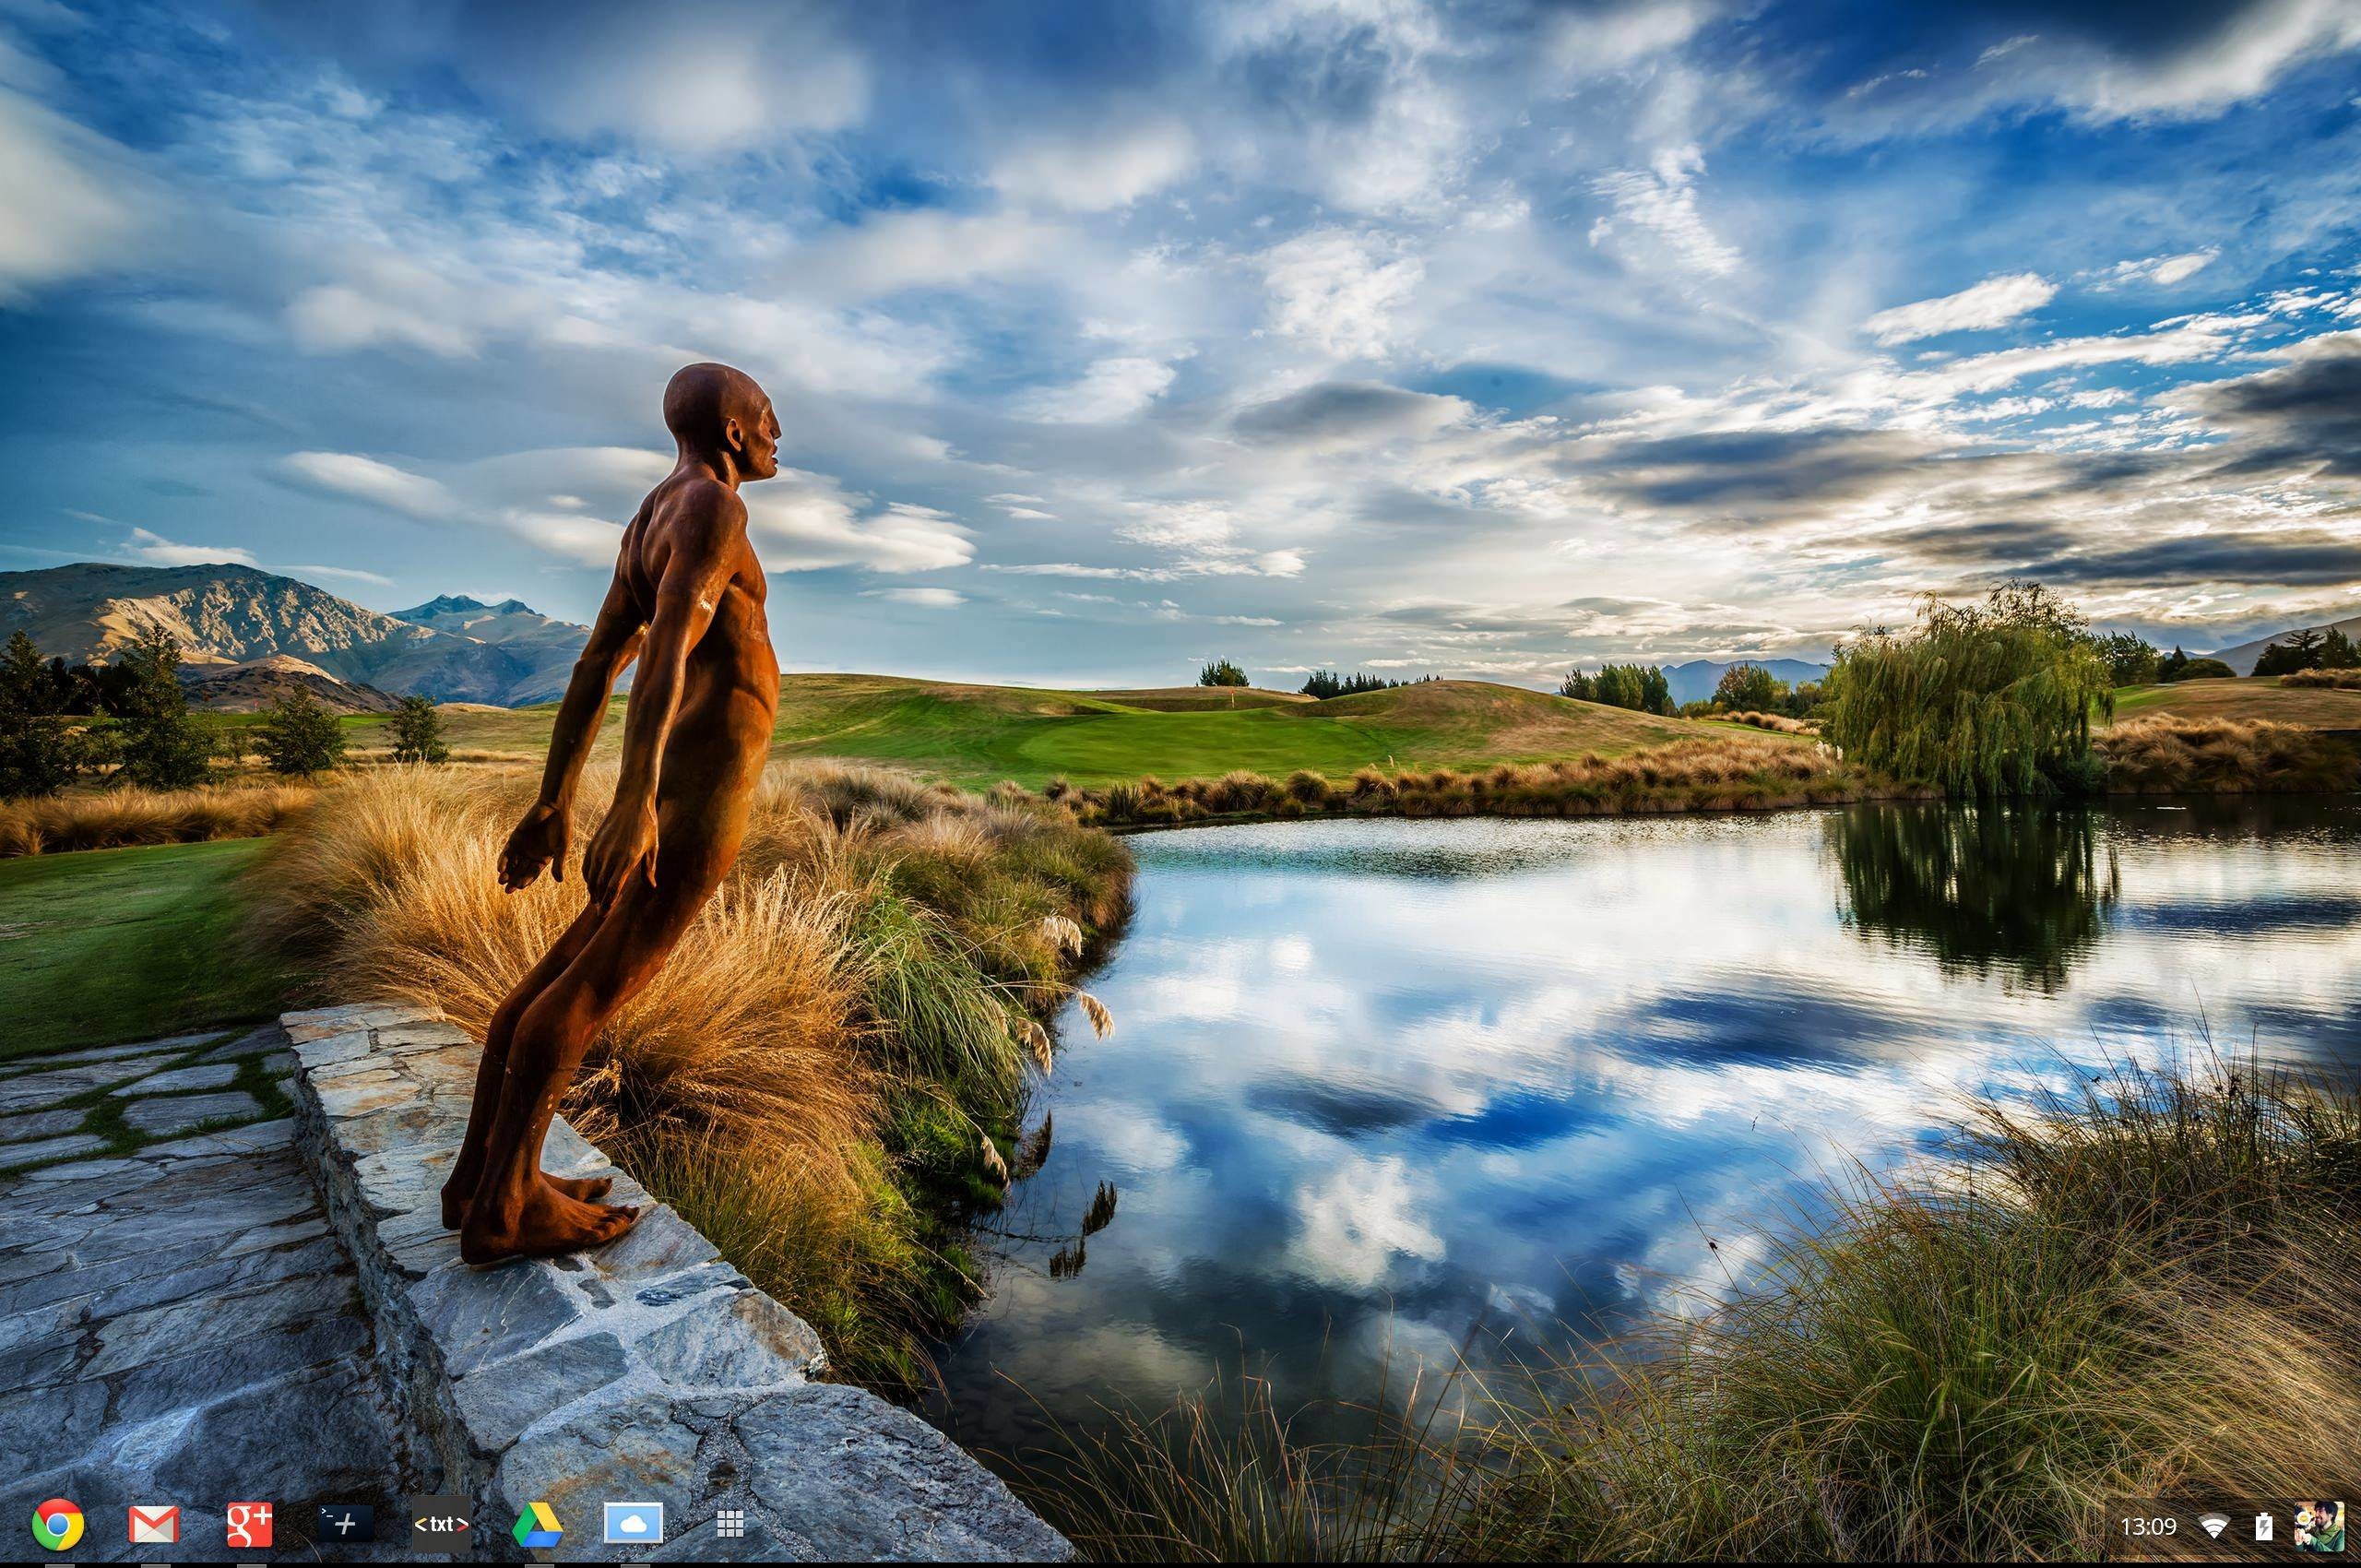 chromebook wallpapers hd,natural landscape,nature,sky,reflection,water